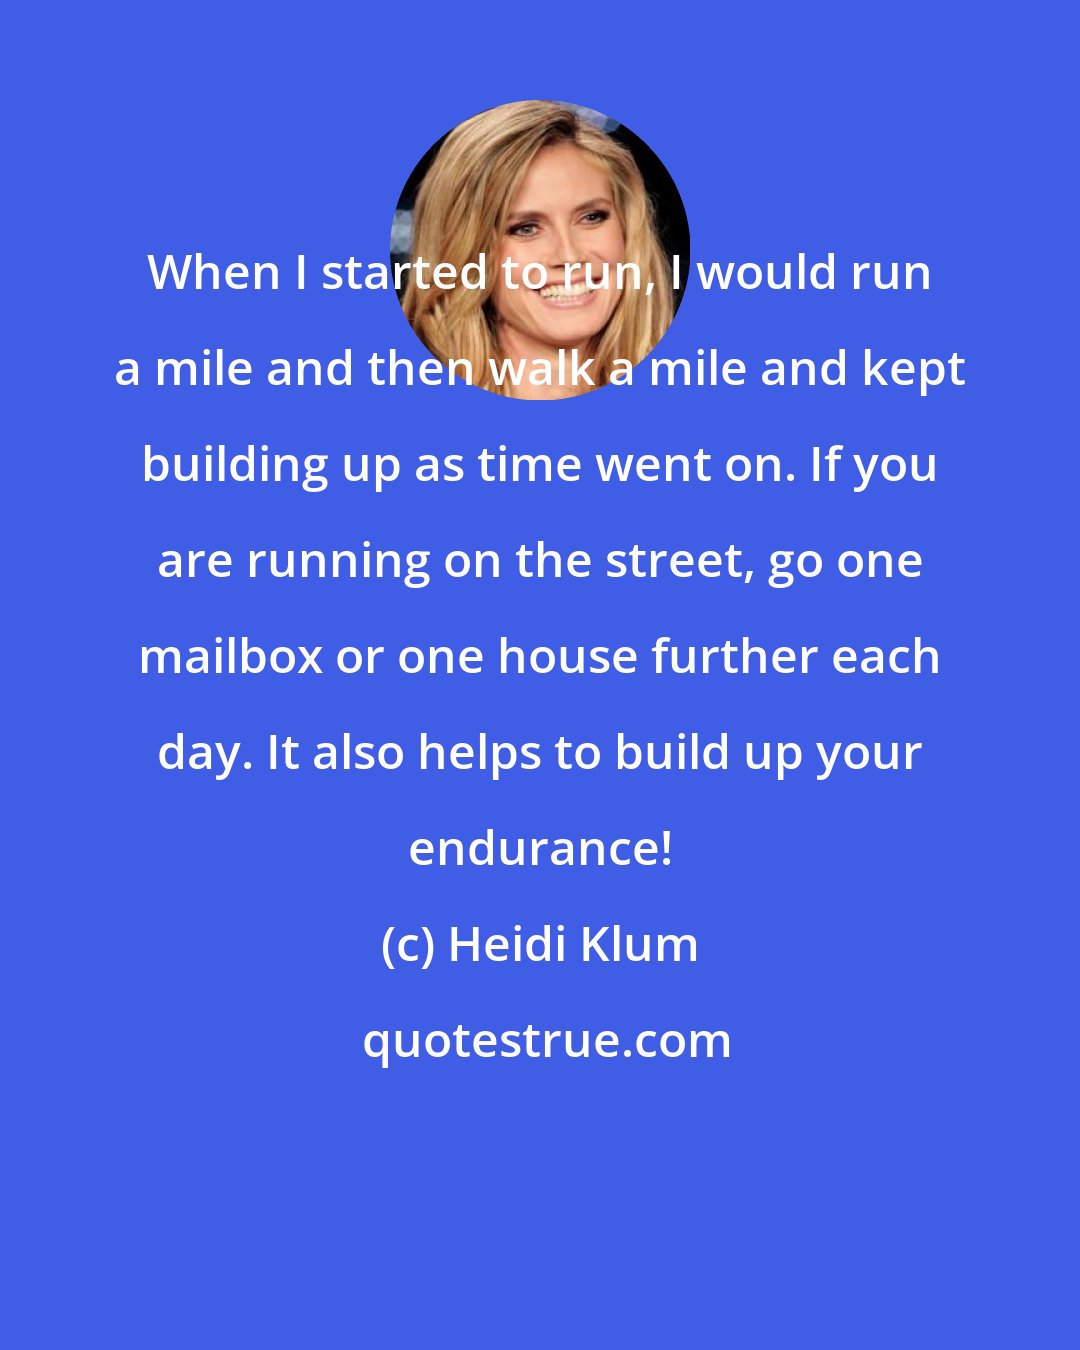 Heidi Klum: When I started to run, I would run a mile and then walk a mile and kept building up as time went on. If you are running on the street, go one mailbox or one house further each day. It also helps to build up your endurance!